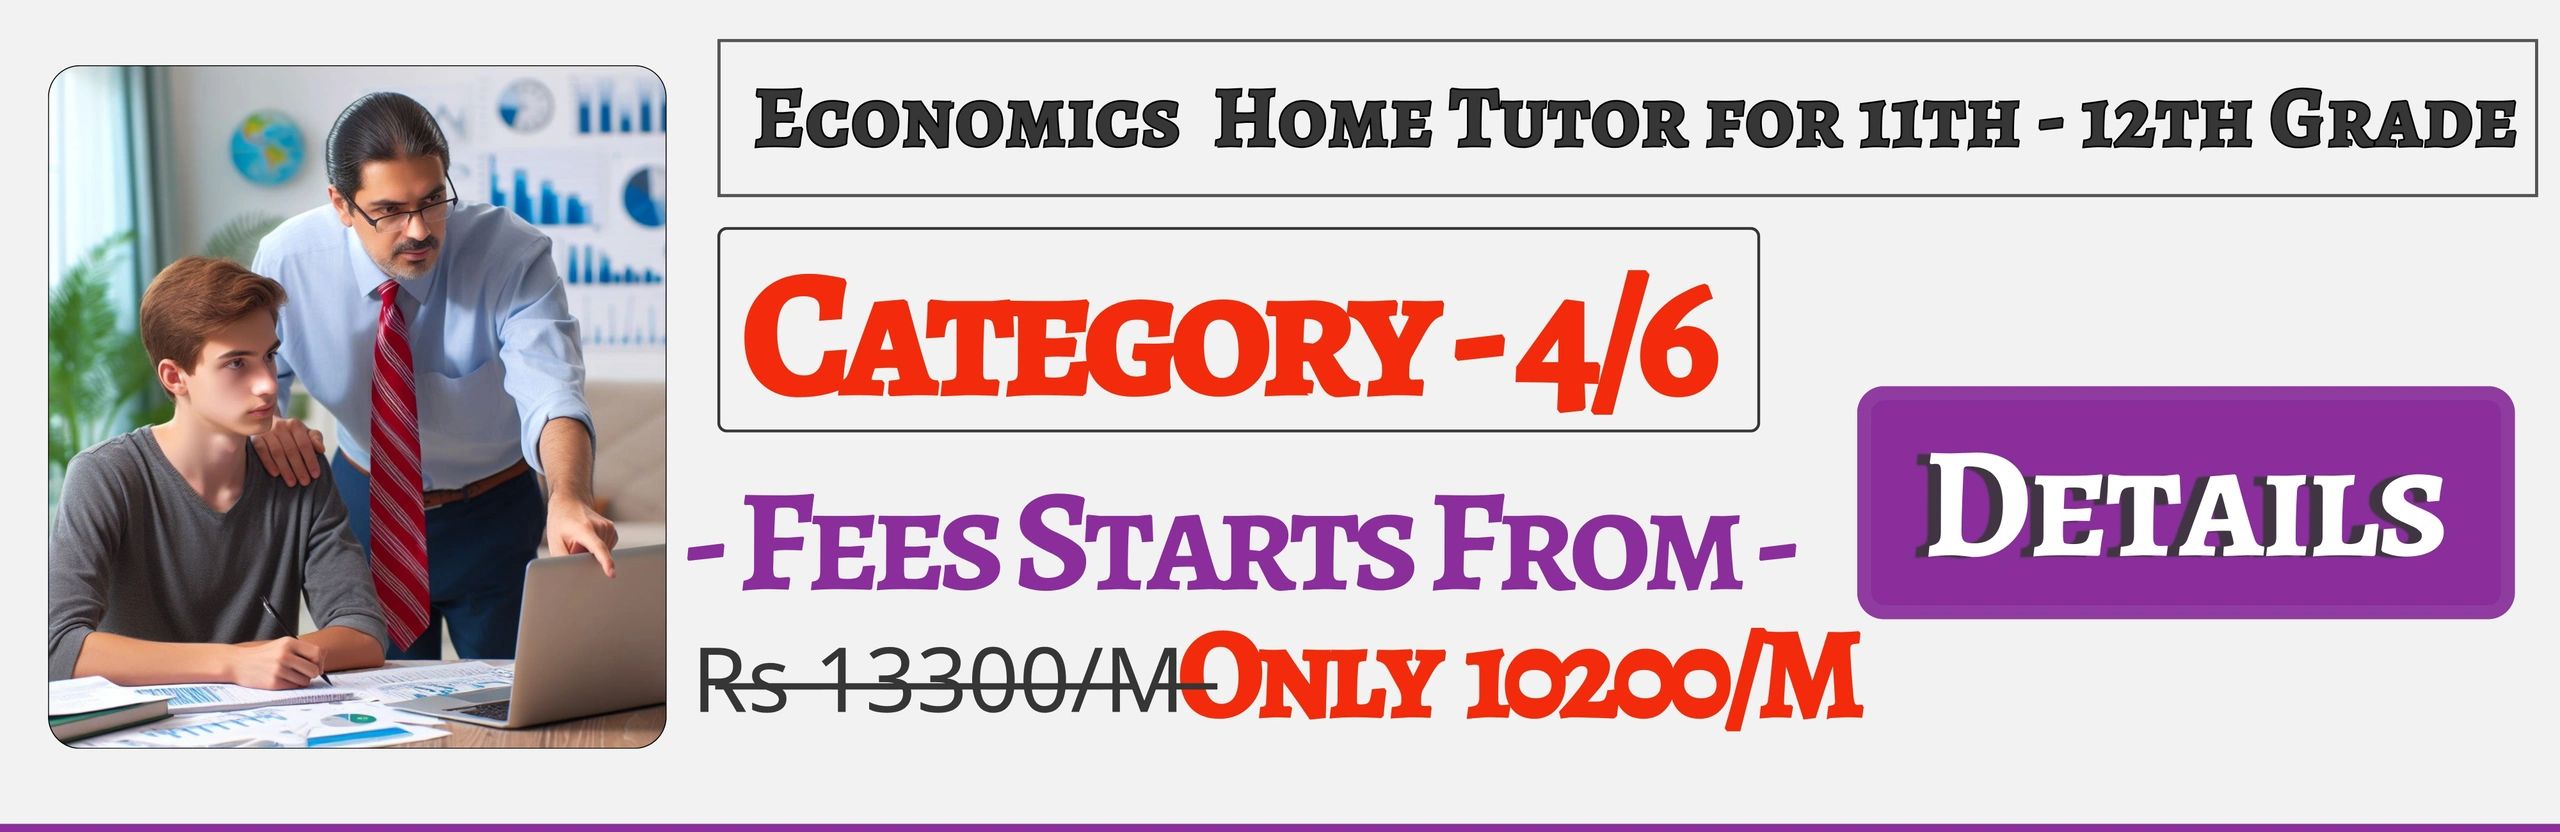 Book Best Nearby Economics Home Tuition Tutors For 11th & 12th Jaipur ,Fees Only 10200/M